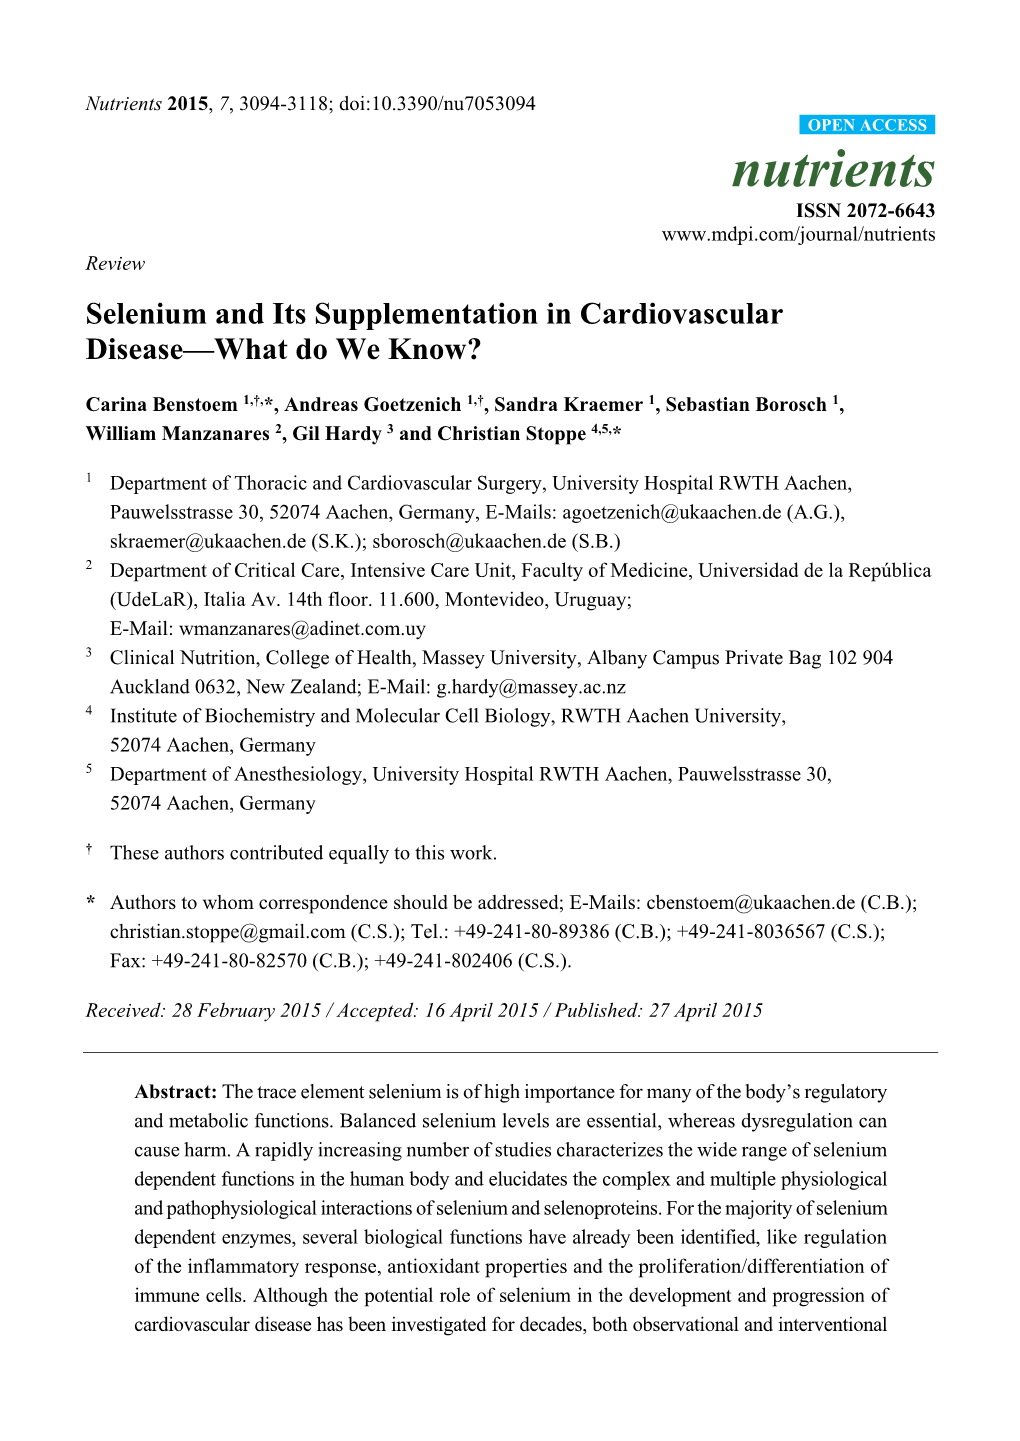 Selenium and Its Supplementation in Cardiovascular Disease—What Do We Know?